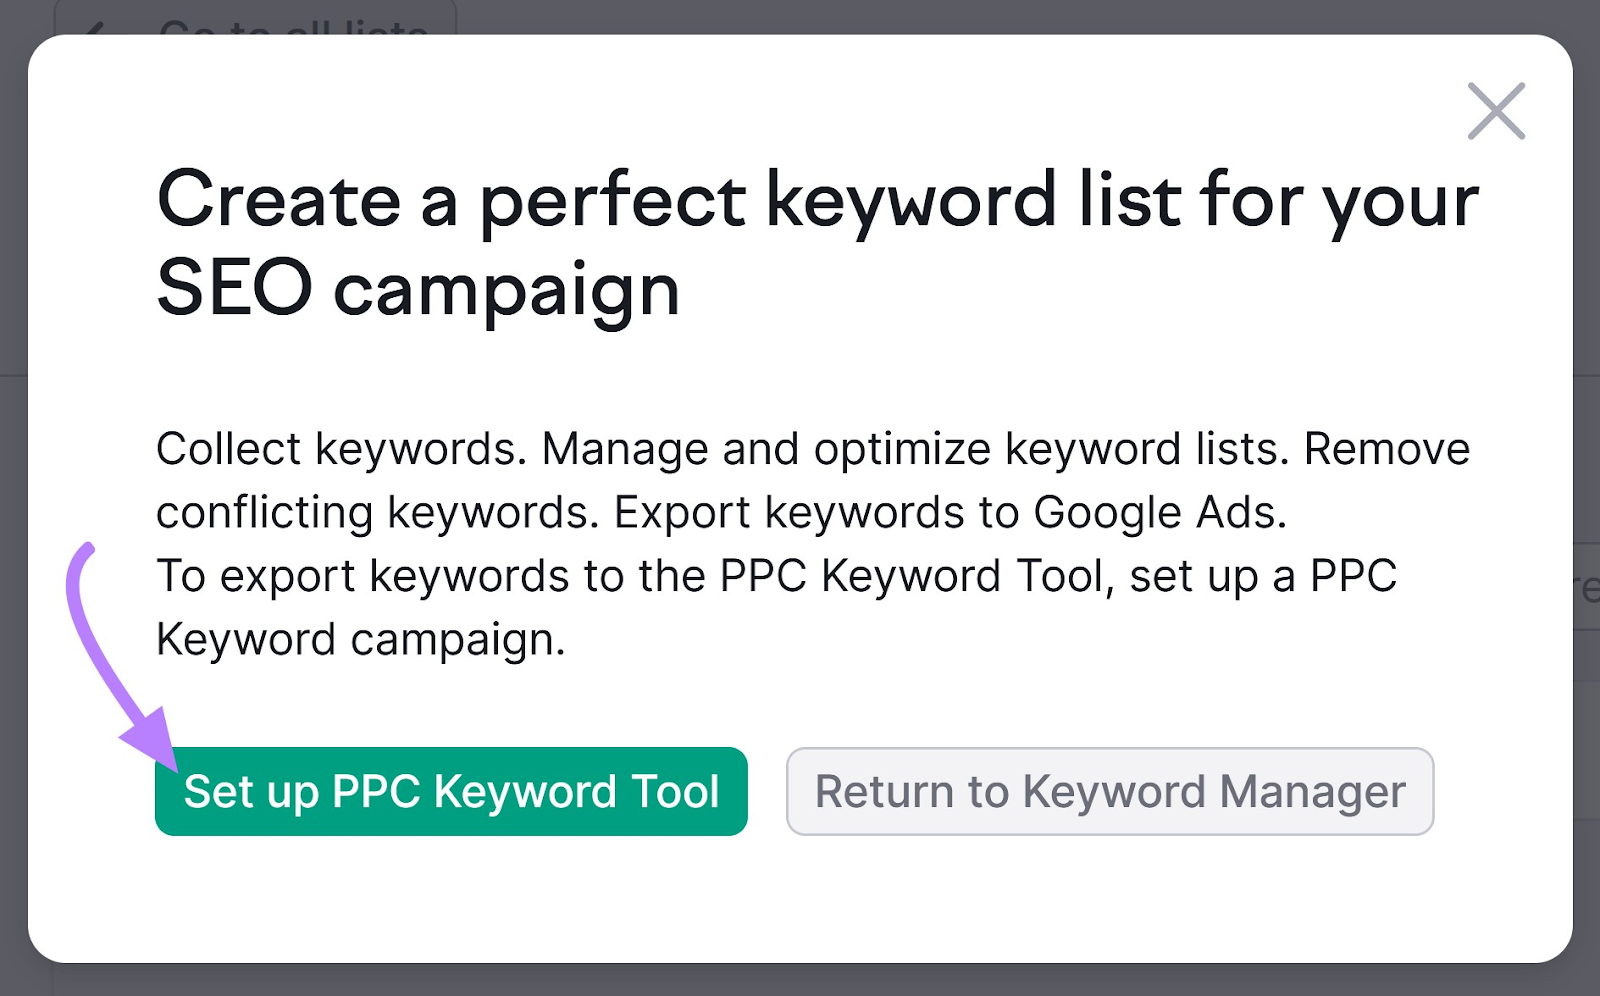 "Create a perfect keyword list for your SEO campaign" dialogue box